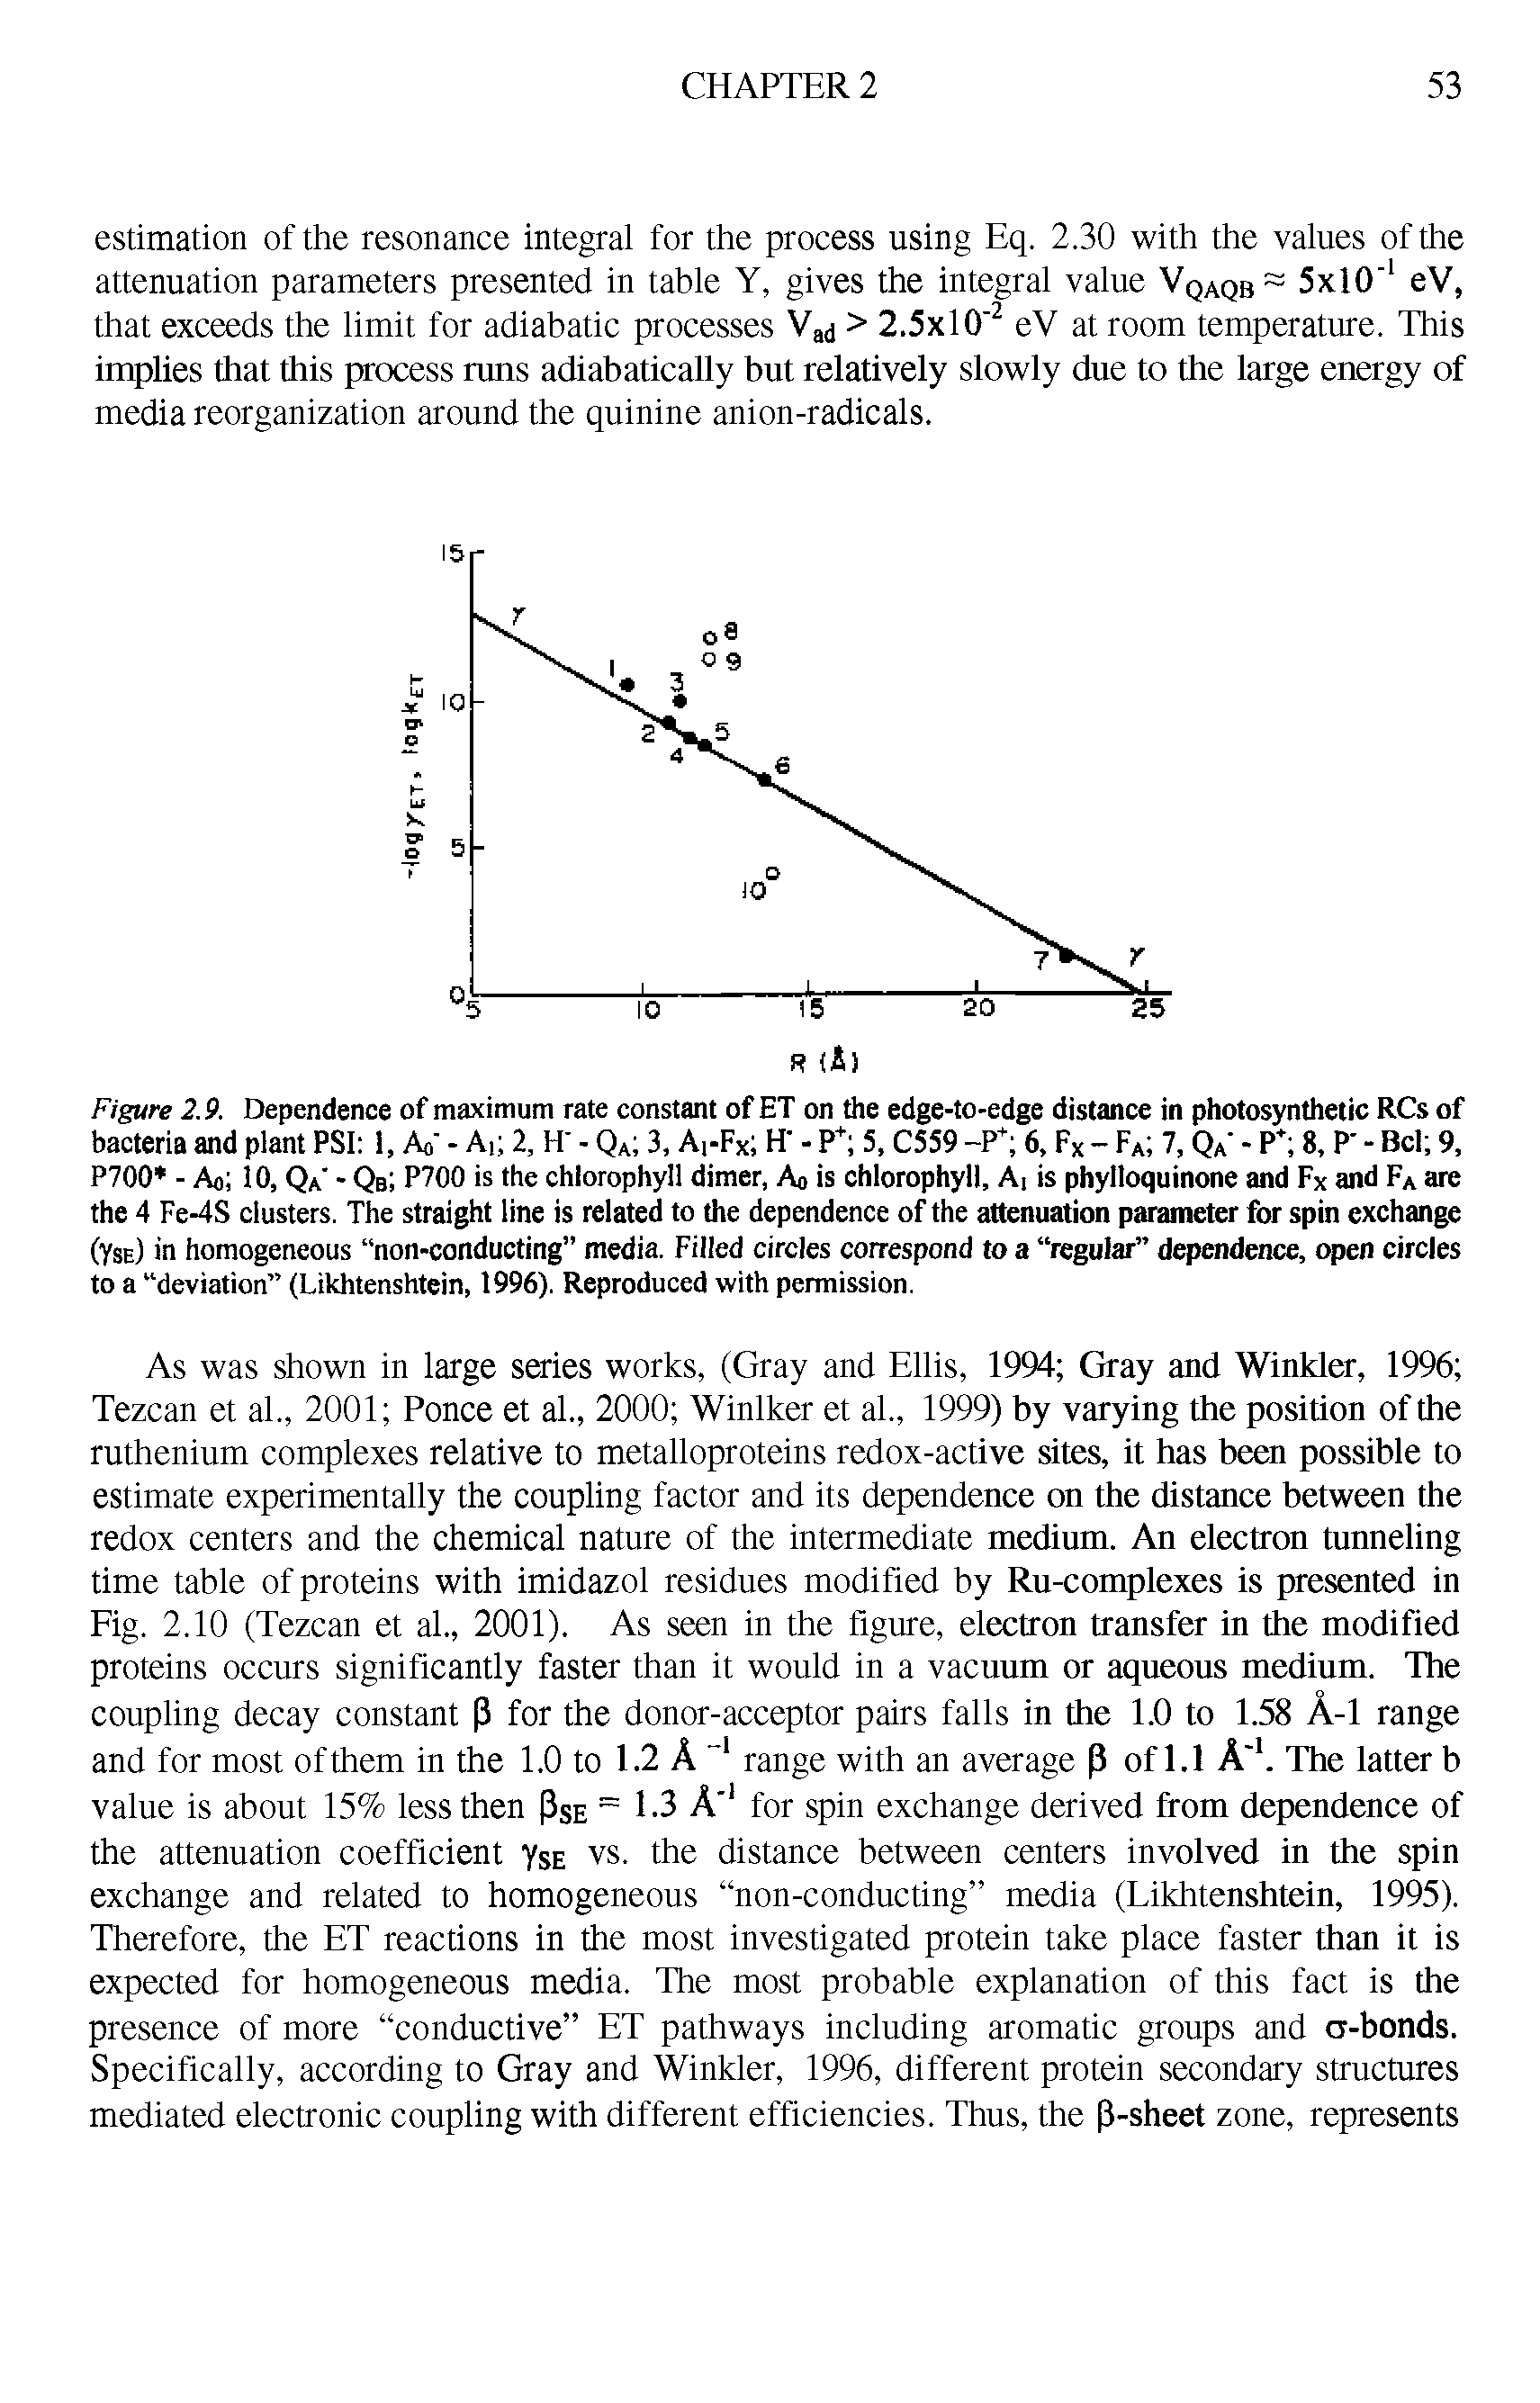 Figure 2.9. Dependence of maximum rate constant of ET on the edge-to-edge distance in photosynthetic RCs of bacteria and plant PSI 1, Ao - A, 2, IT - QA 3, A,-Fx H - P+ 5, C559 -P+ 6, Fx - FA 7, QA - P 8, P - Bel 9, P700 - Ao 10, Qa - QB P700 is the chlorophyll dimer, Ao is chlorophyll, A, is phylloquinone and Fx and FA are the 4 Fe-4S clusters. The straight line is related to the dependence of the attenuation parameter for spin exchange (Yse) in homogeneous non-conducting media. Filled circles correspond to a regular dependence, open circles to a deviation (Likhtenshtein, 1996). Reproduced with permission.